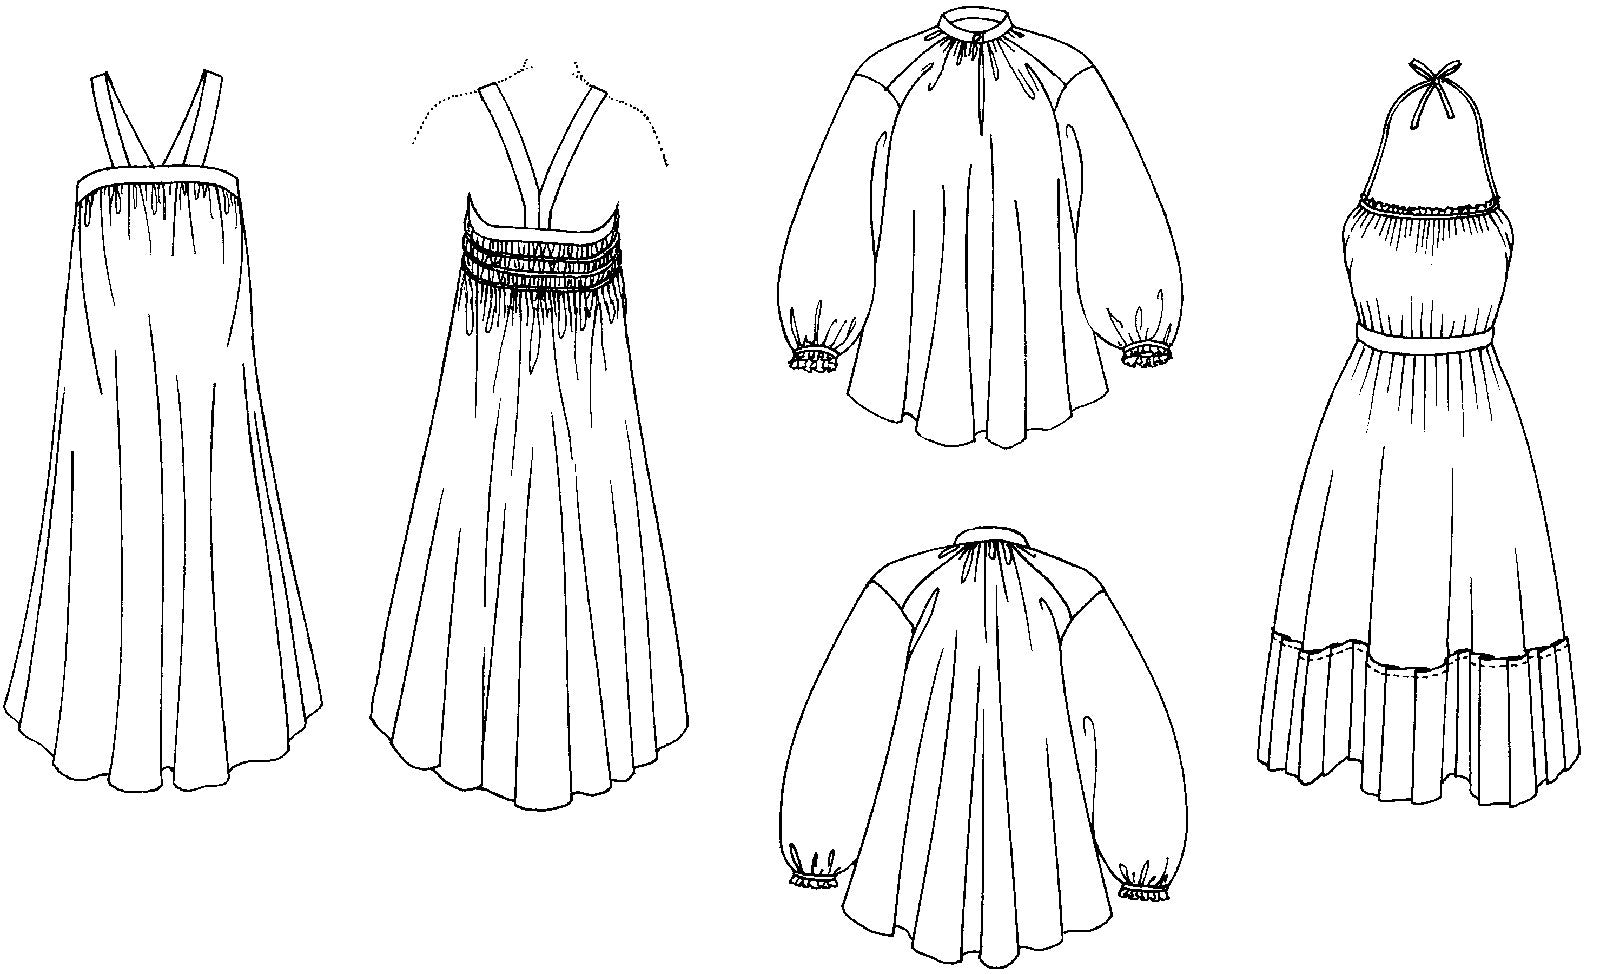 Flat line drawing of all views of Russian Settler's Dress, blouse, and apron.